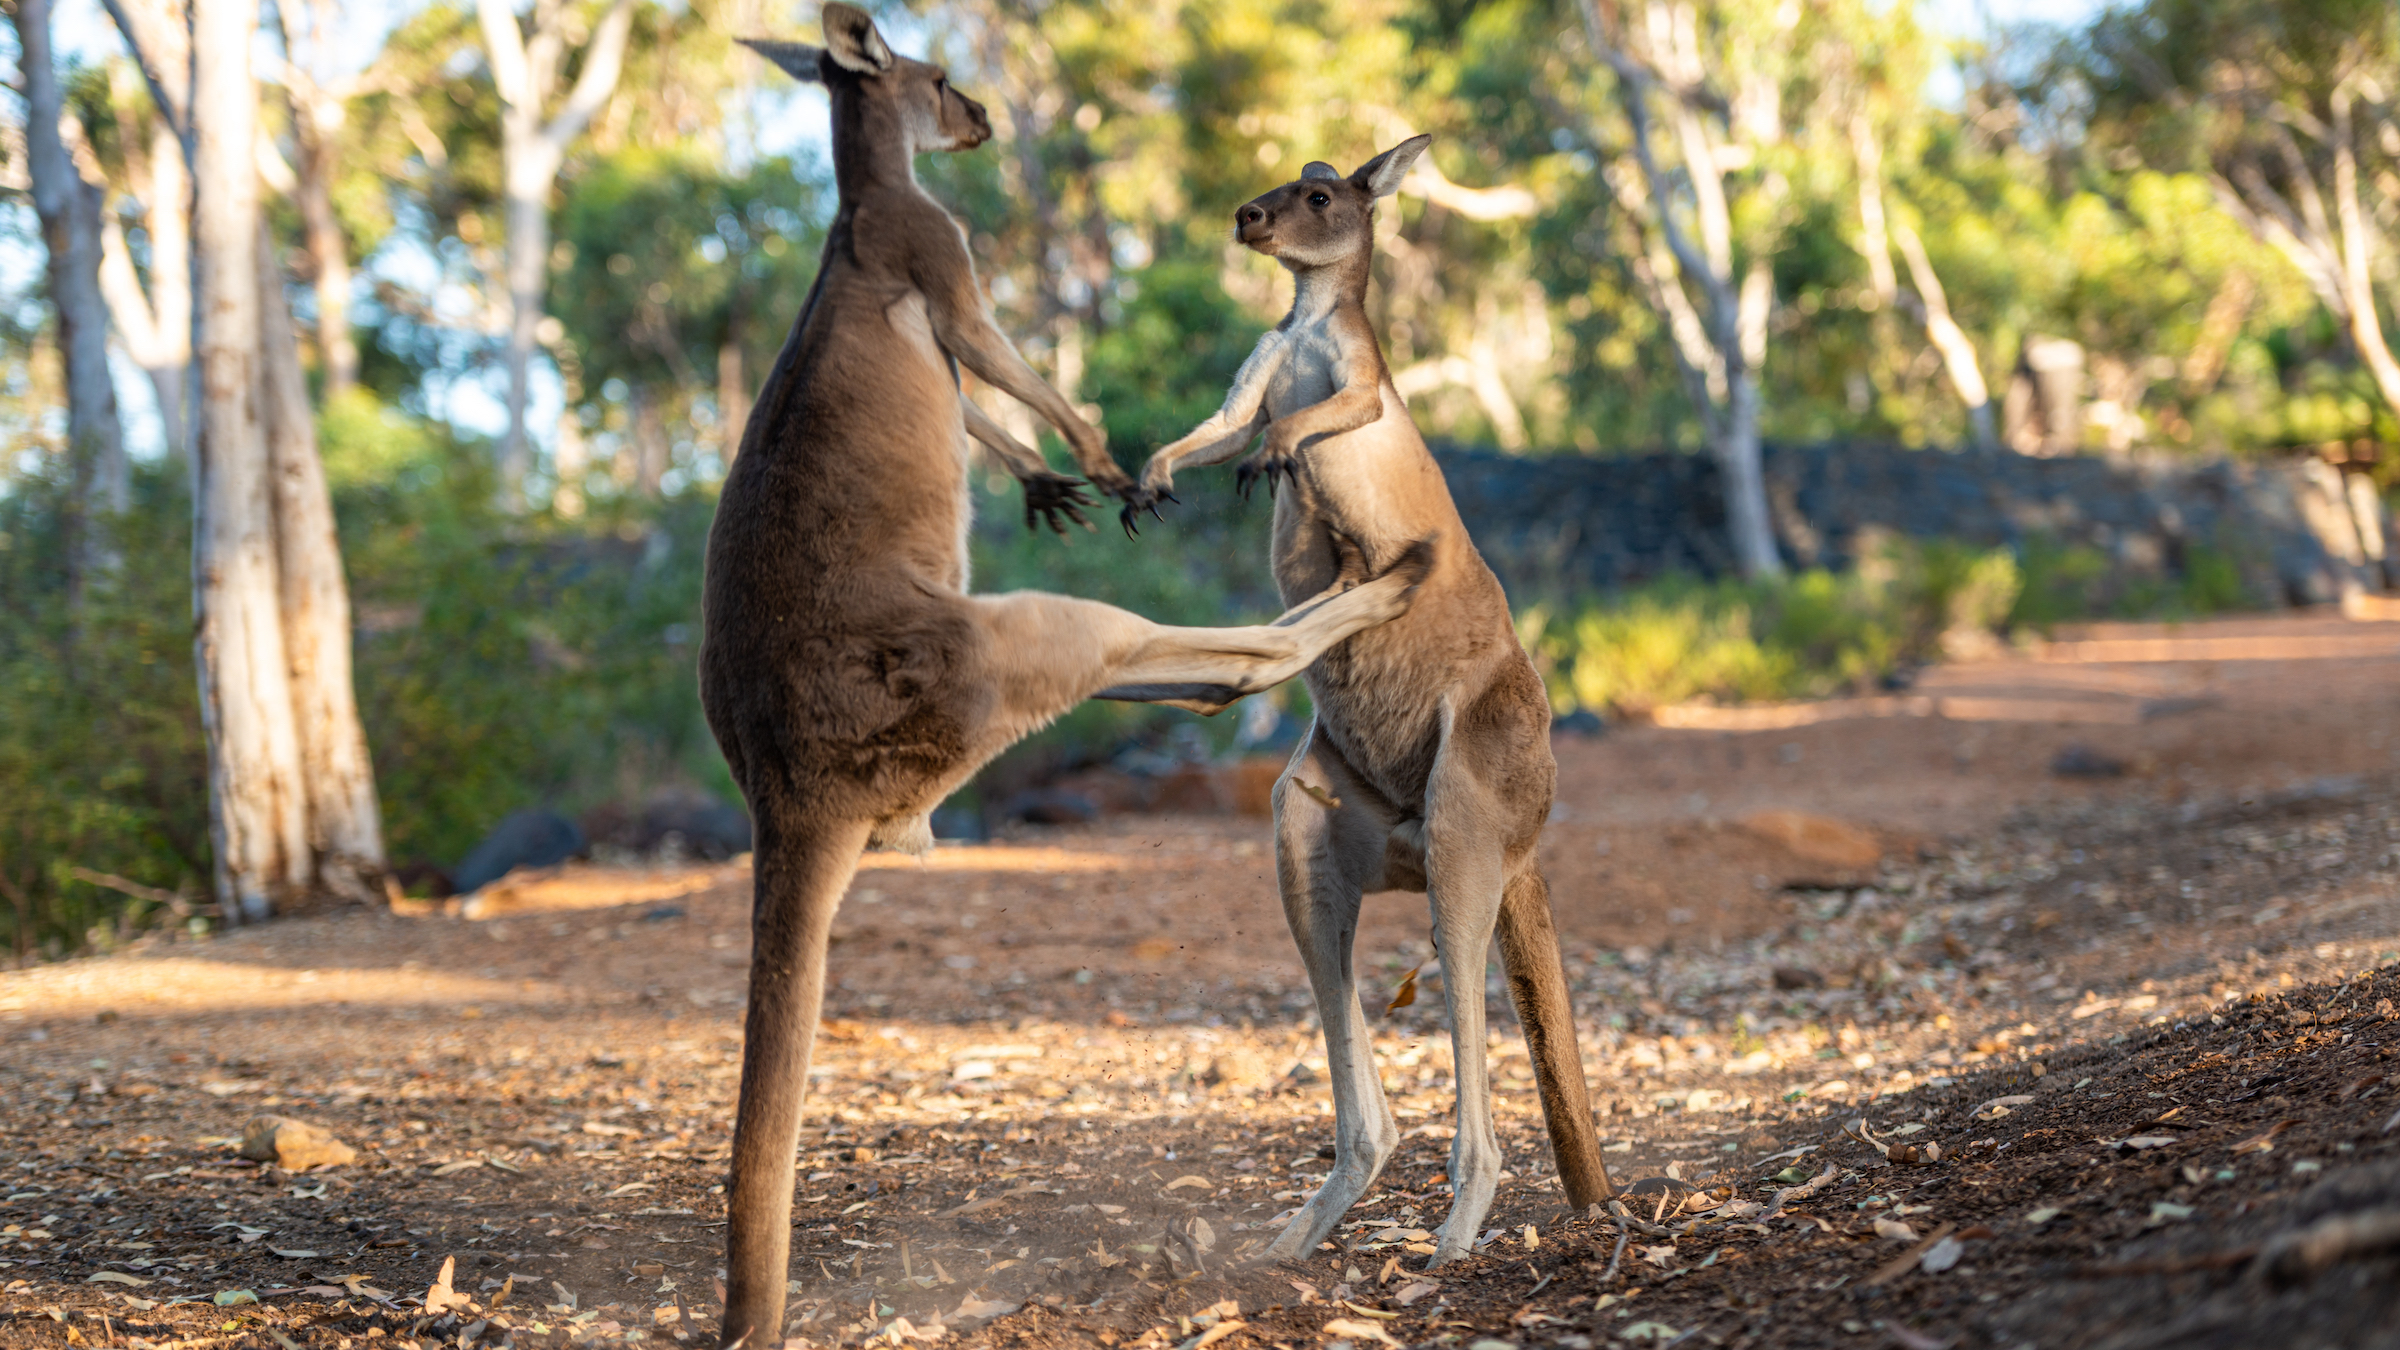 A western gray kangaroo (Macropus fuliginosus) kickboxes while standing on its tail in John Forest National Park in Perth, Western Australia.